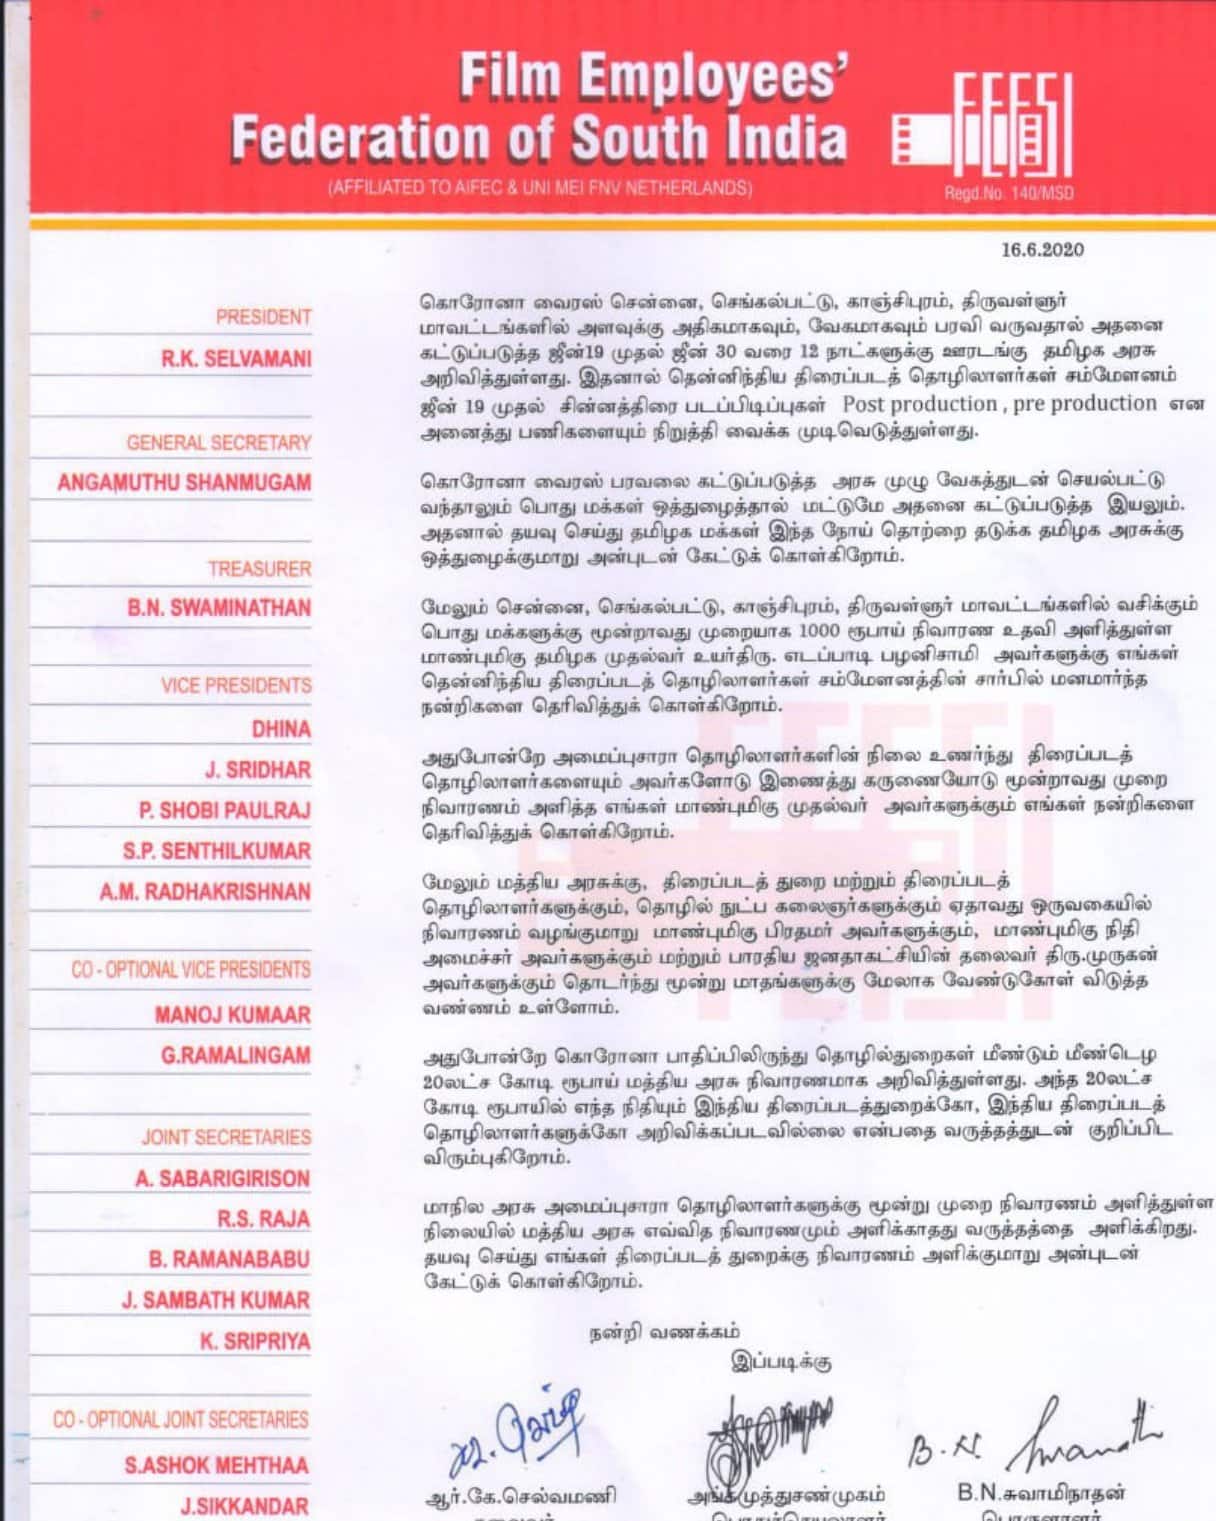 Film Employees Federation of South India